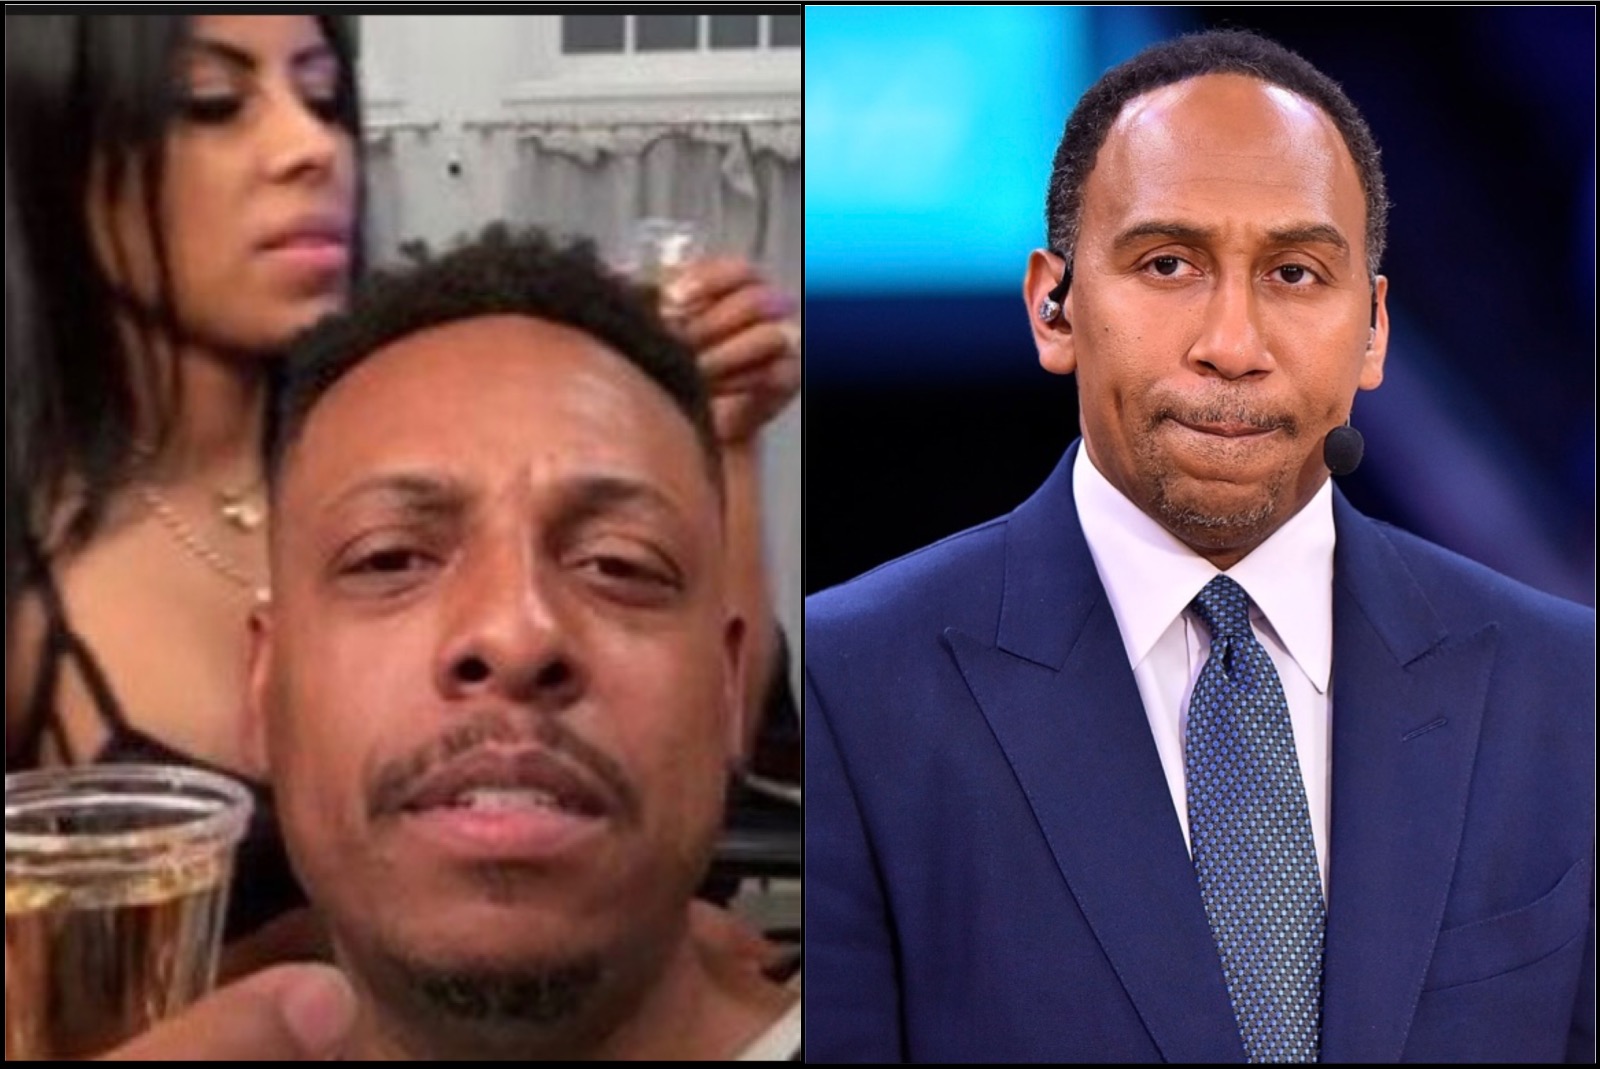 Stephen A. Smith Says He’s Upset Paul Pierce is Bringing Strippers on His Live Stream